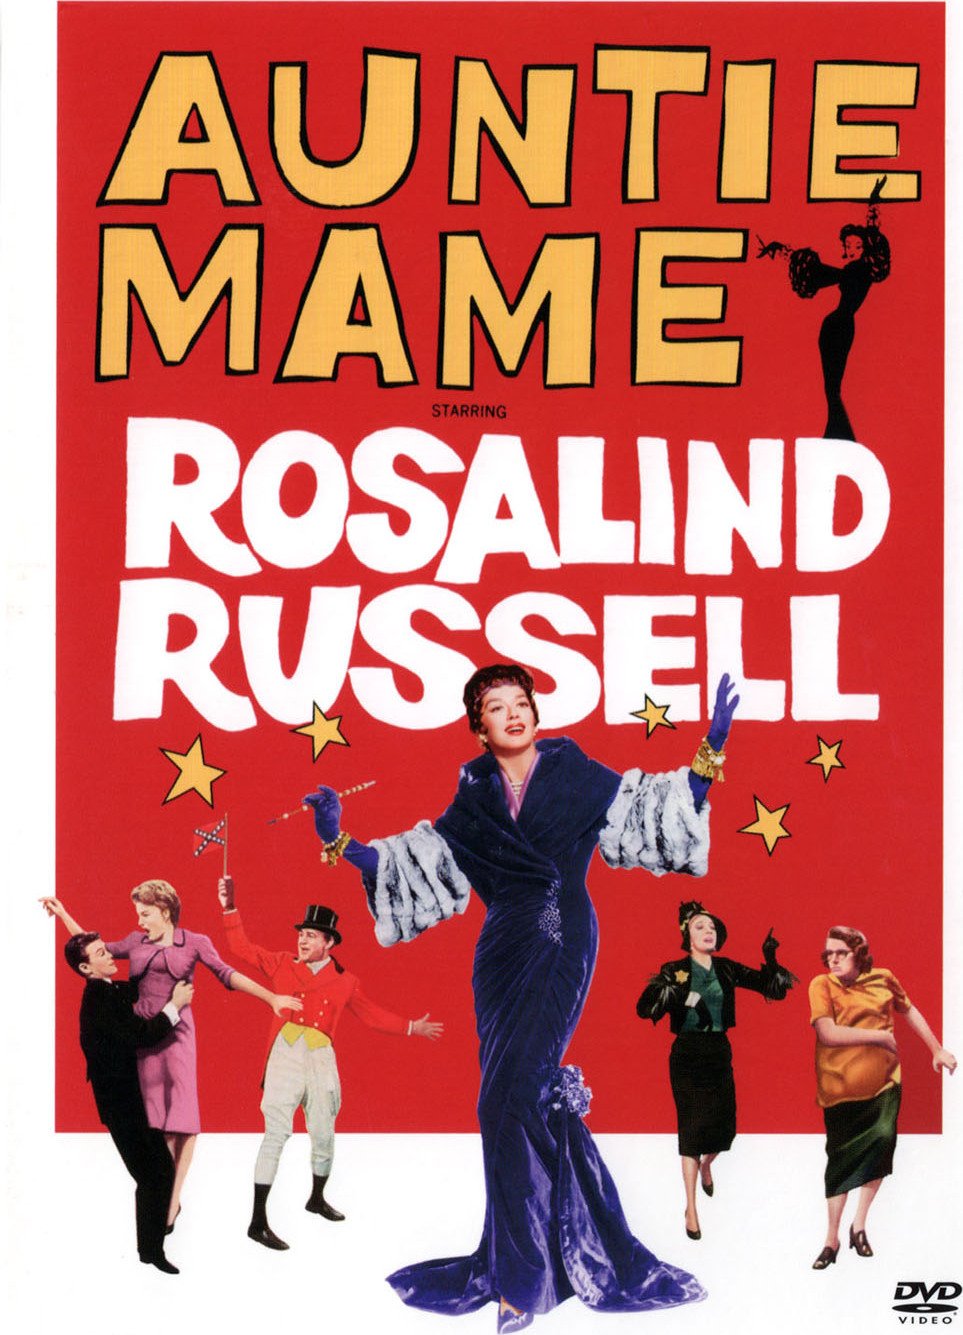 Movie poster for Auntie Mame